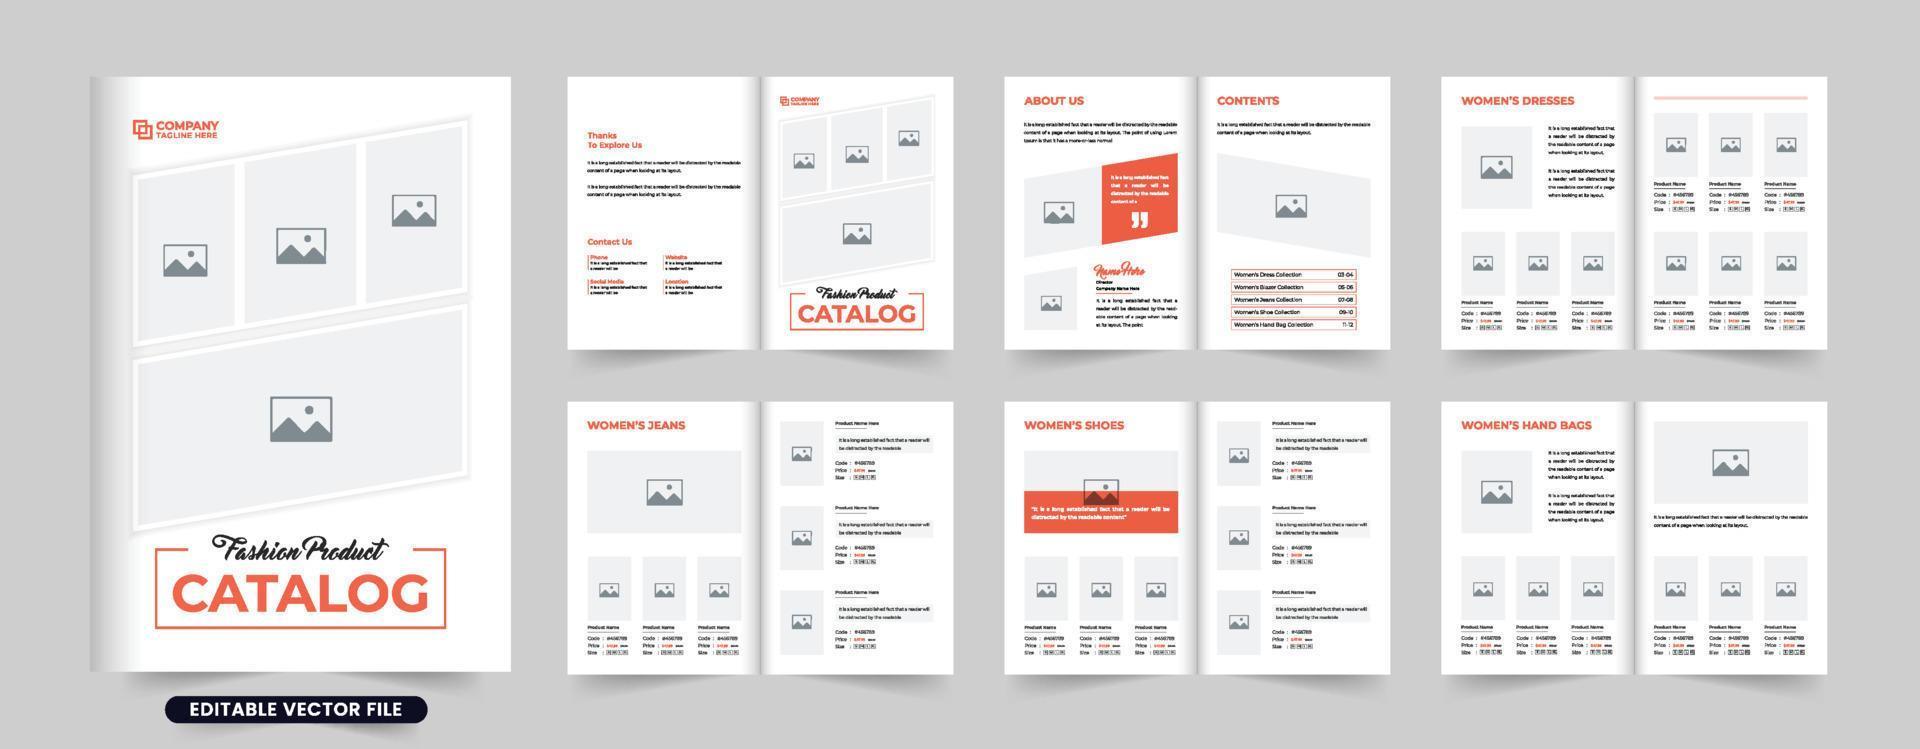 Women's fashion brand promotion and product sale catalog template vector with orange and dark colors. Modern fashion brand product advertisement brochure template. Product catalog magazine vector.